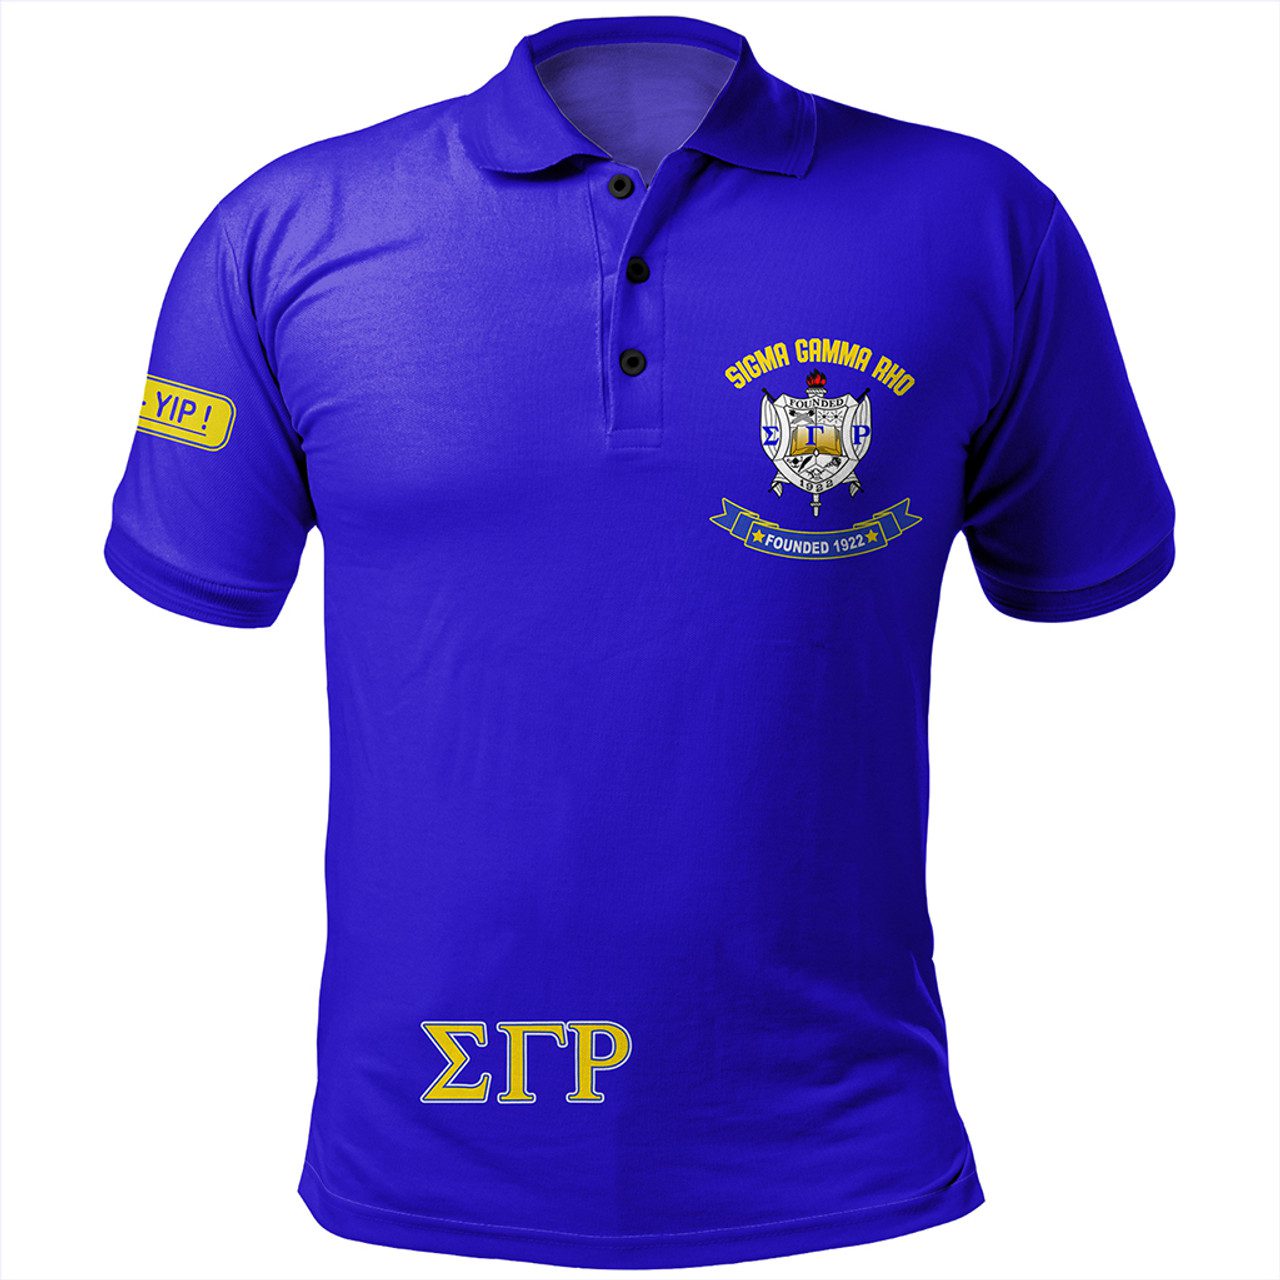 Sigma Gamma Rho Polo Shirt Greater Service And Greater Progress